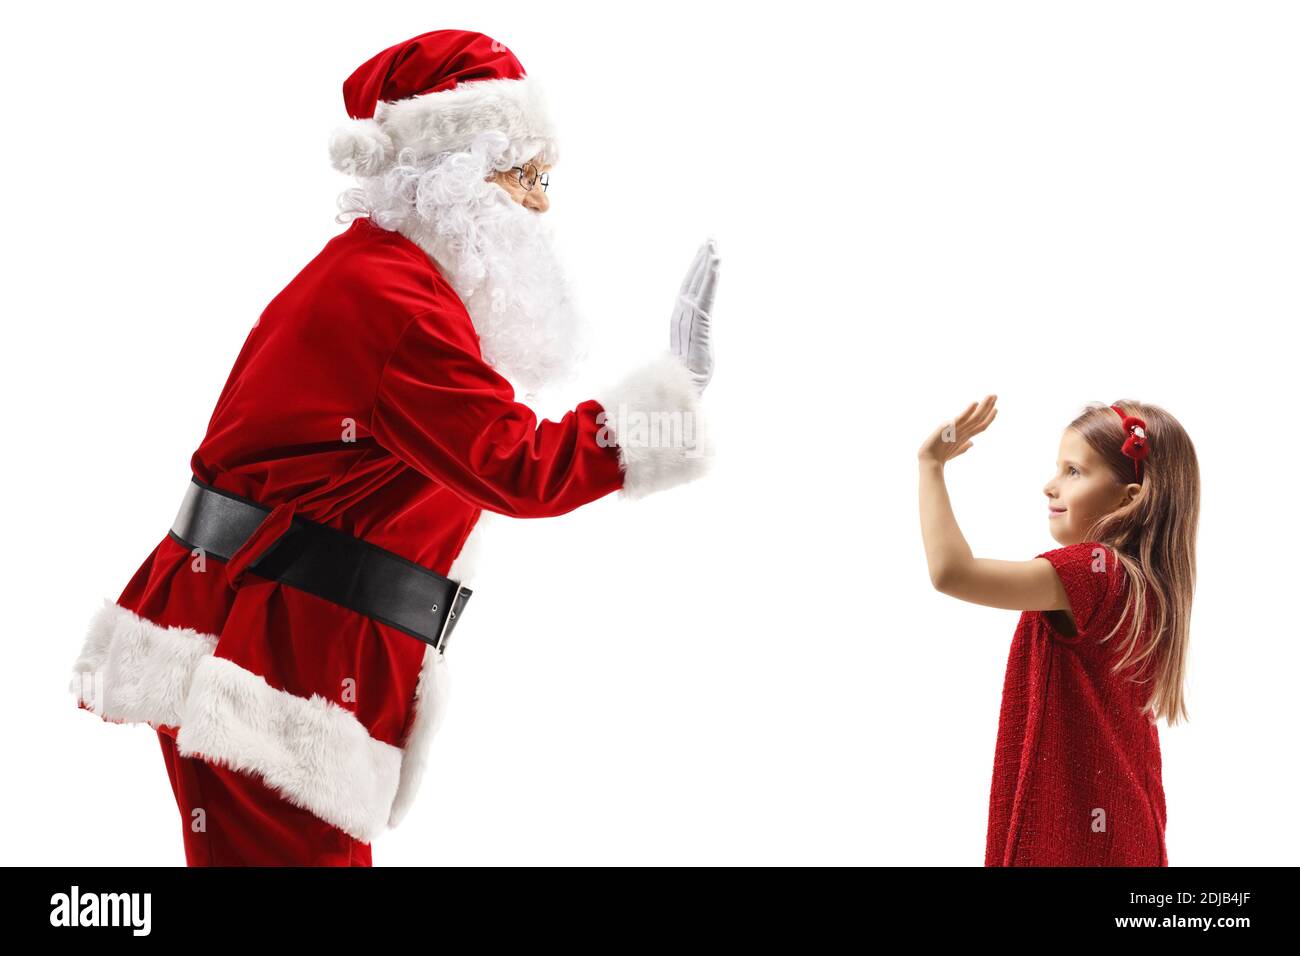 Santa Claus gesturing high-five with a little girl in a red dress isolated on white background Stock Photo